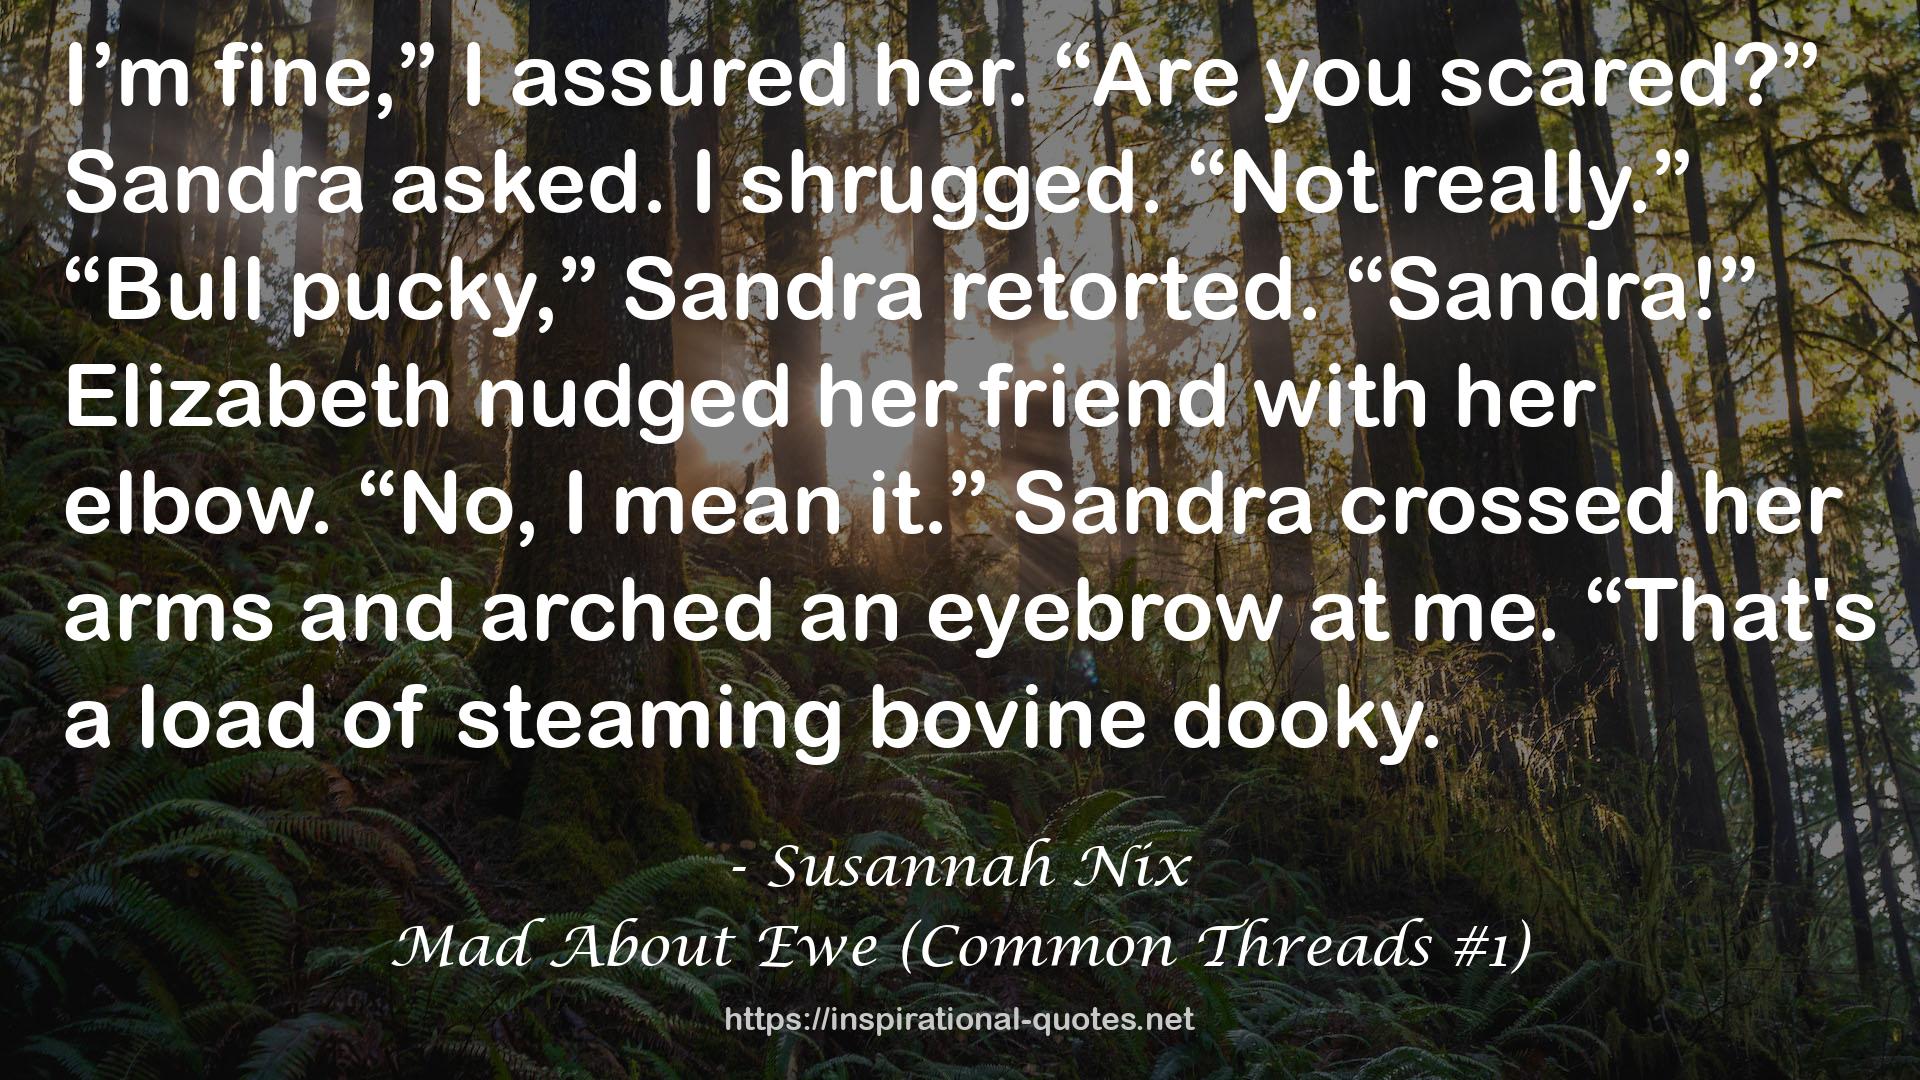 Mad About Ewe (Common Threads #1) QUOTES